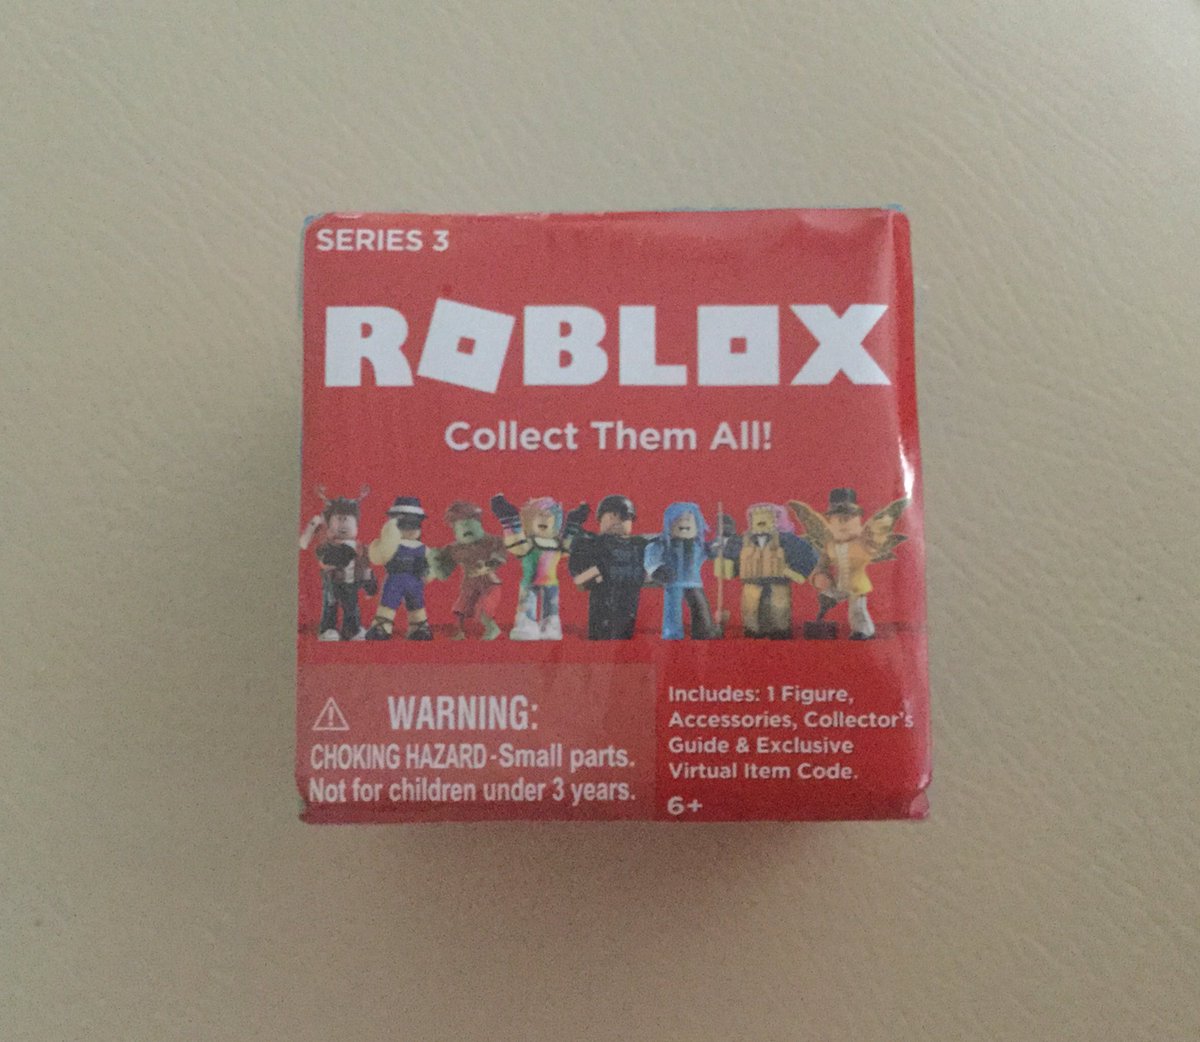 Tiffanytiffany3621 On Twitter Roblox Toys Code D Epic Minigamer Https T Co F6v8qdqyr9 Roblox Jazwares Typicalrblx Robloxtoys Roblox Tiffany3621 Https T Co R6ksyizztg - roblox jazwares collector's guide